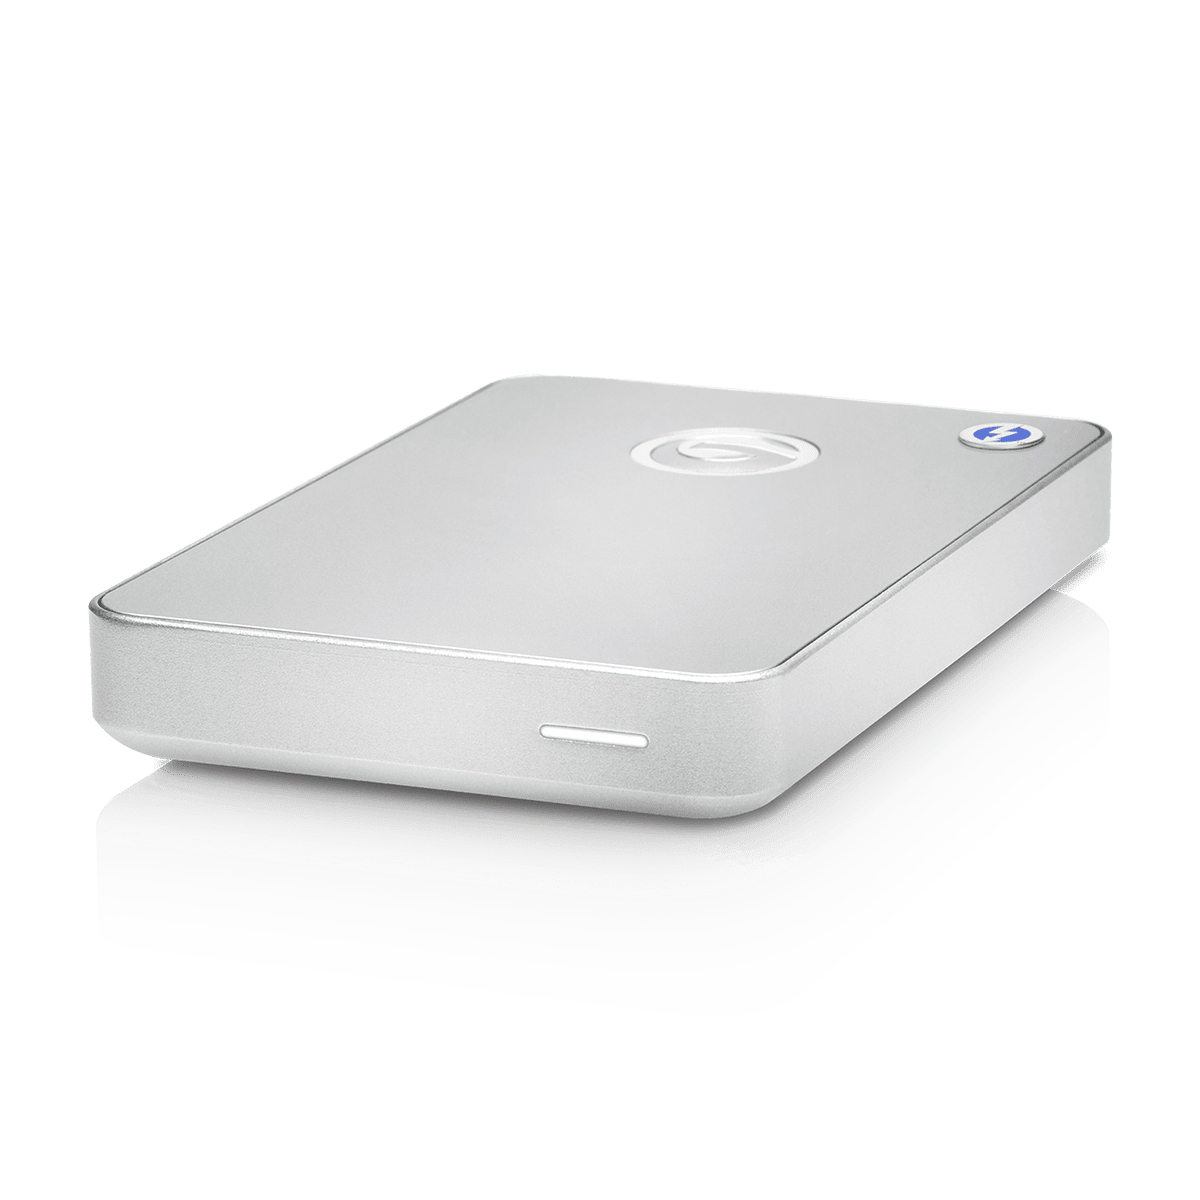 G-Technology G-DRIVE Mobile Thunderbolt and USB 3.0 Portable Hard Drive